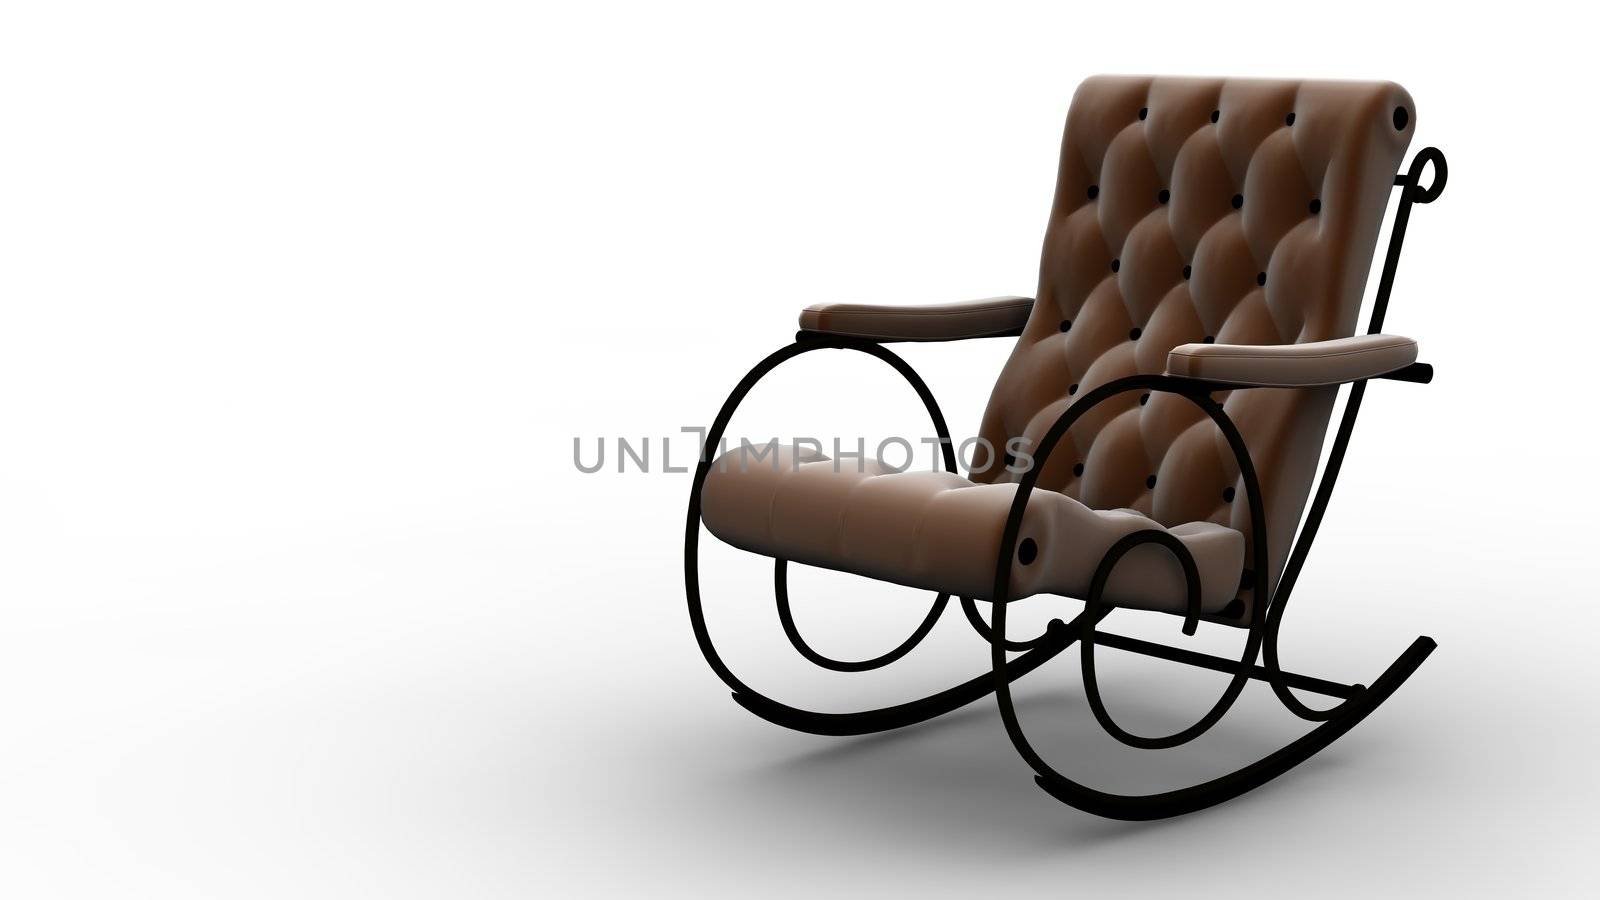 A brown rocking chair isolated on white